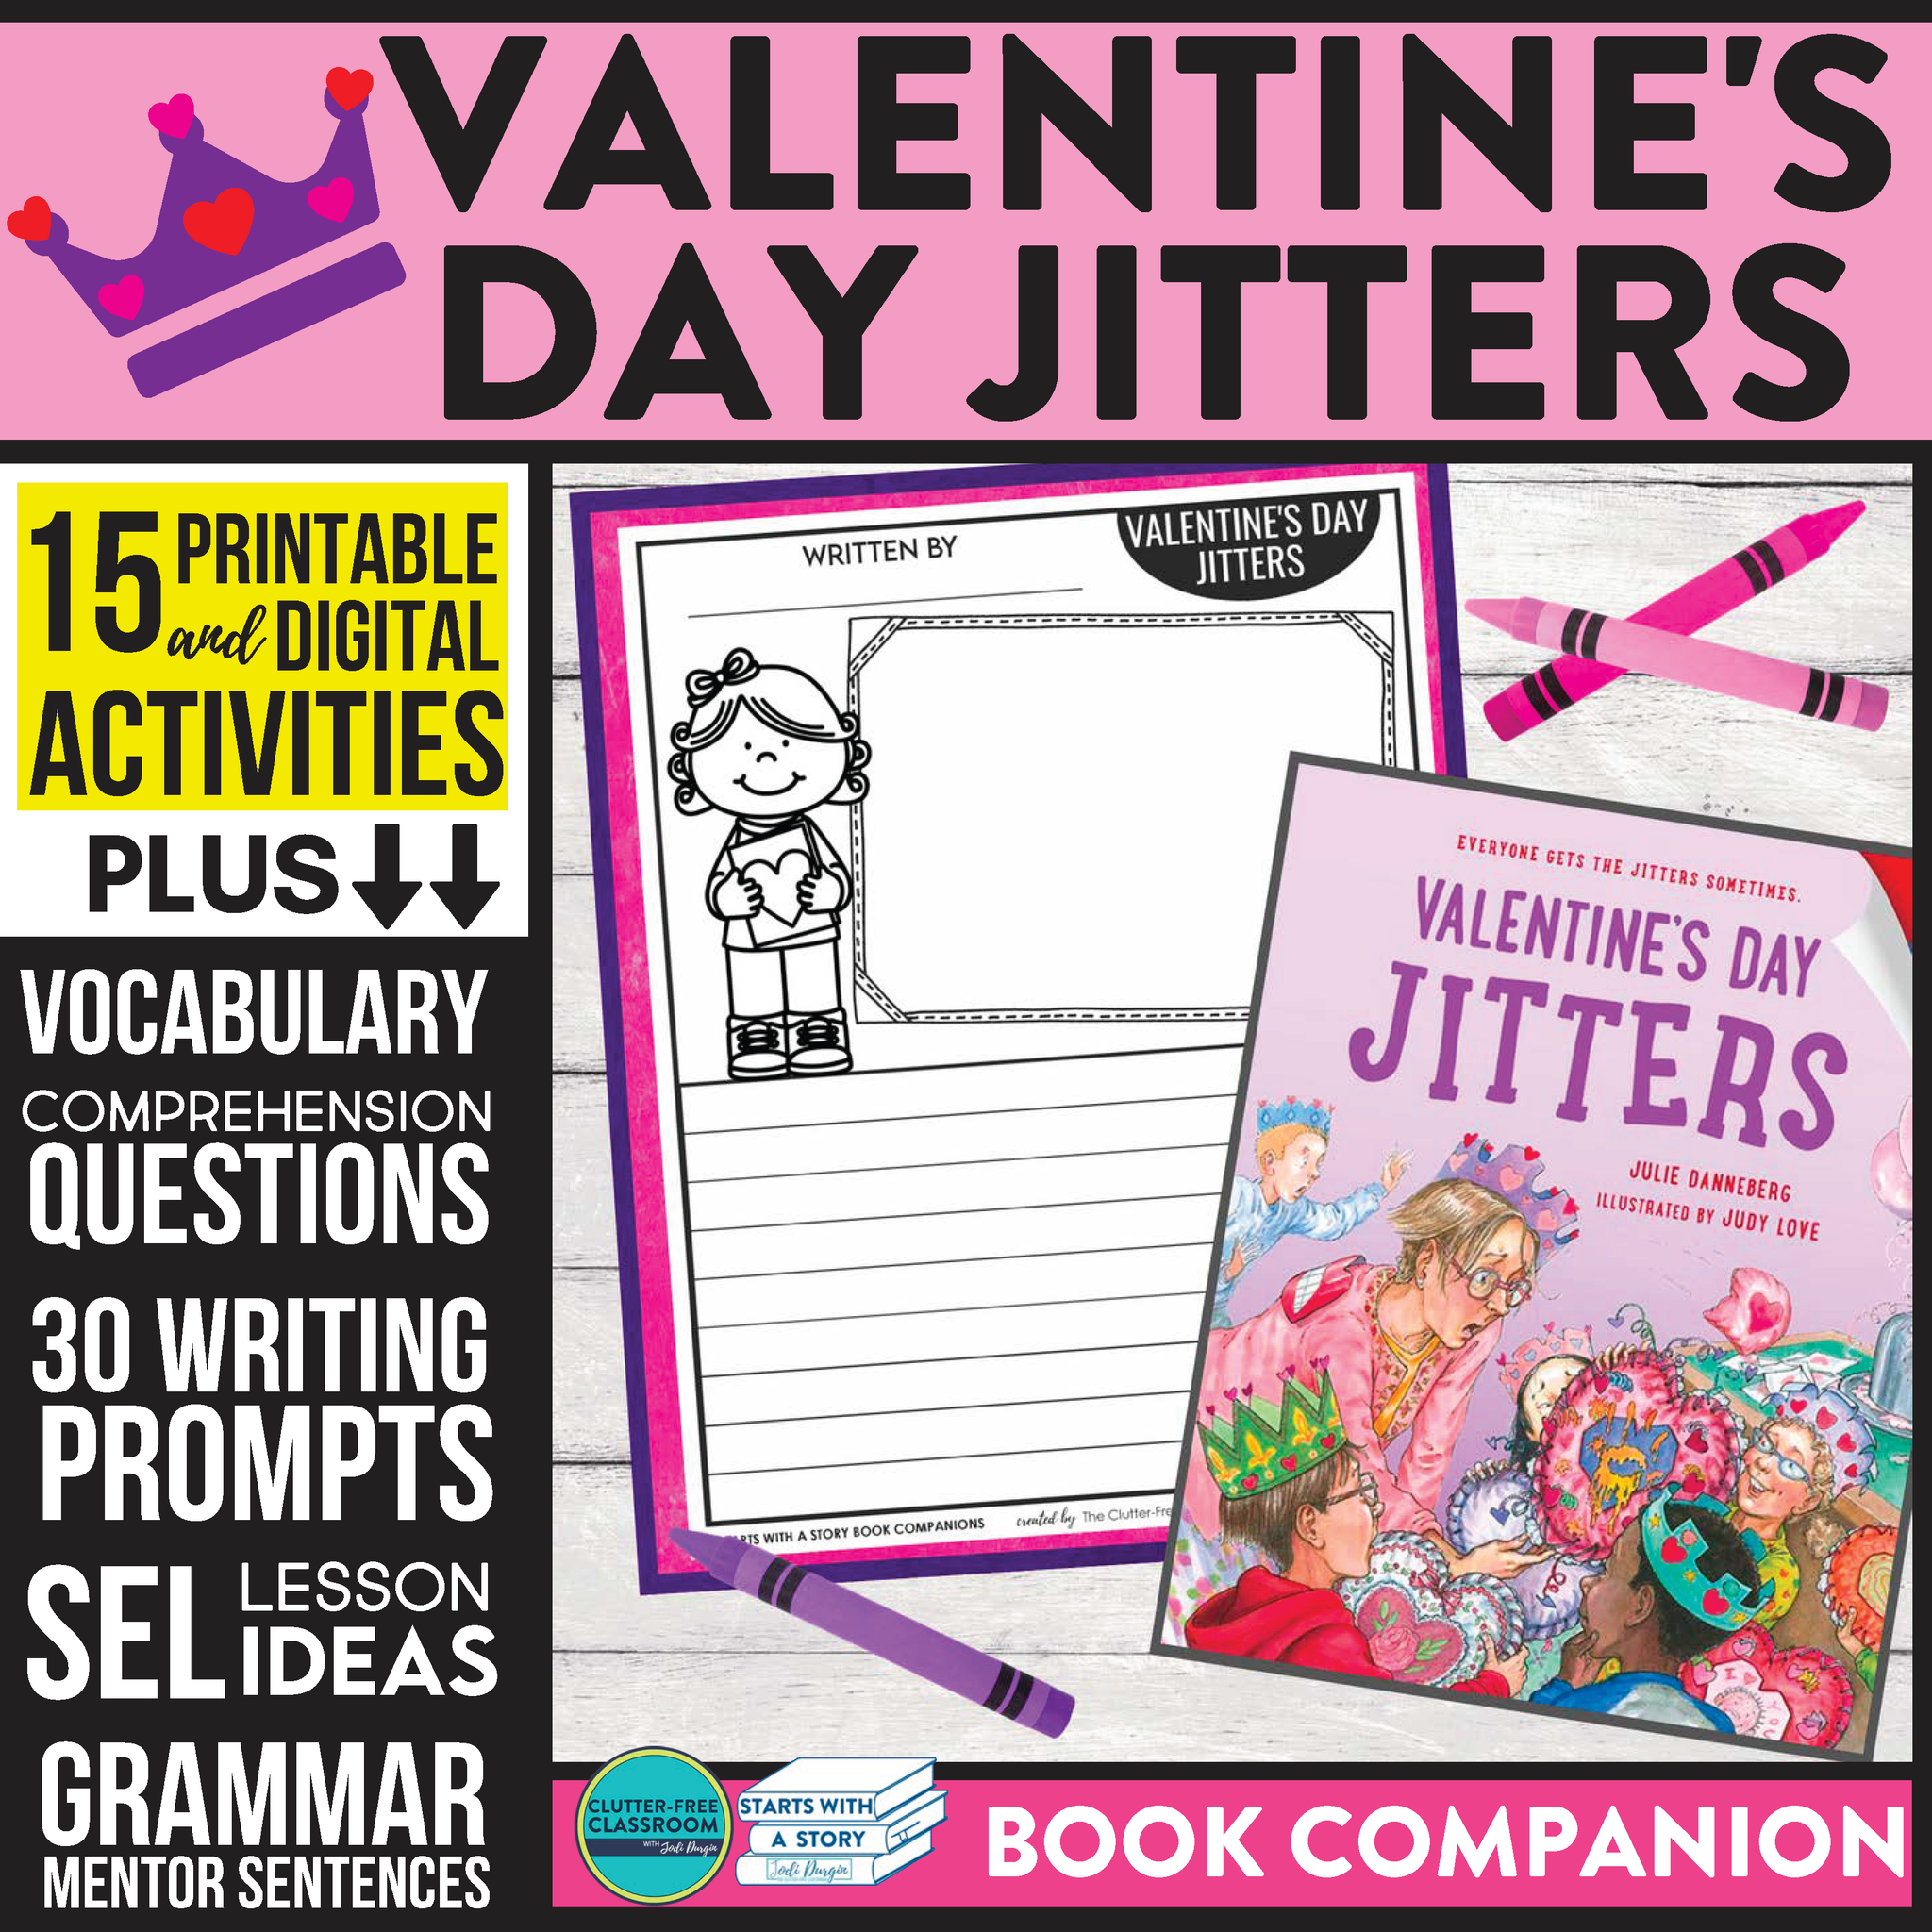 VALENTINES DAY JITTERS activities and lesson plan ideas